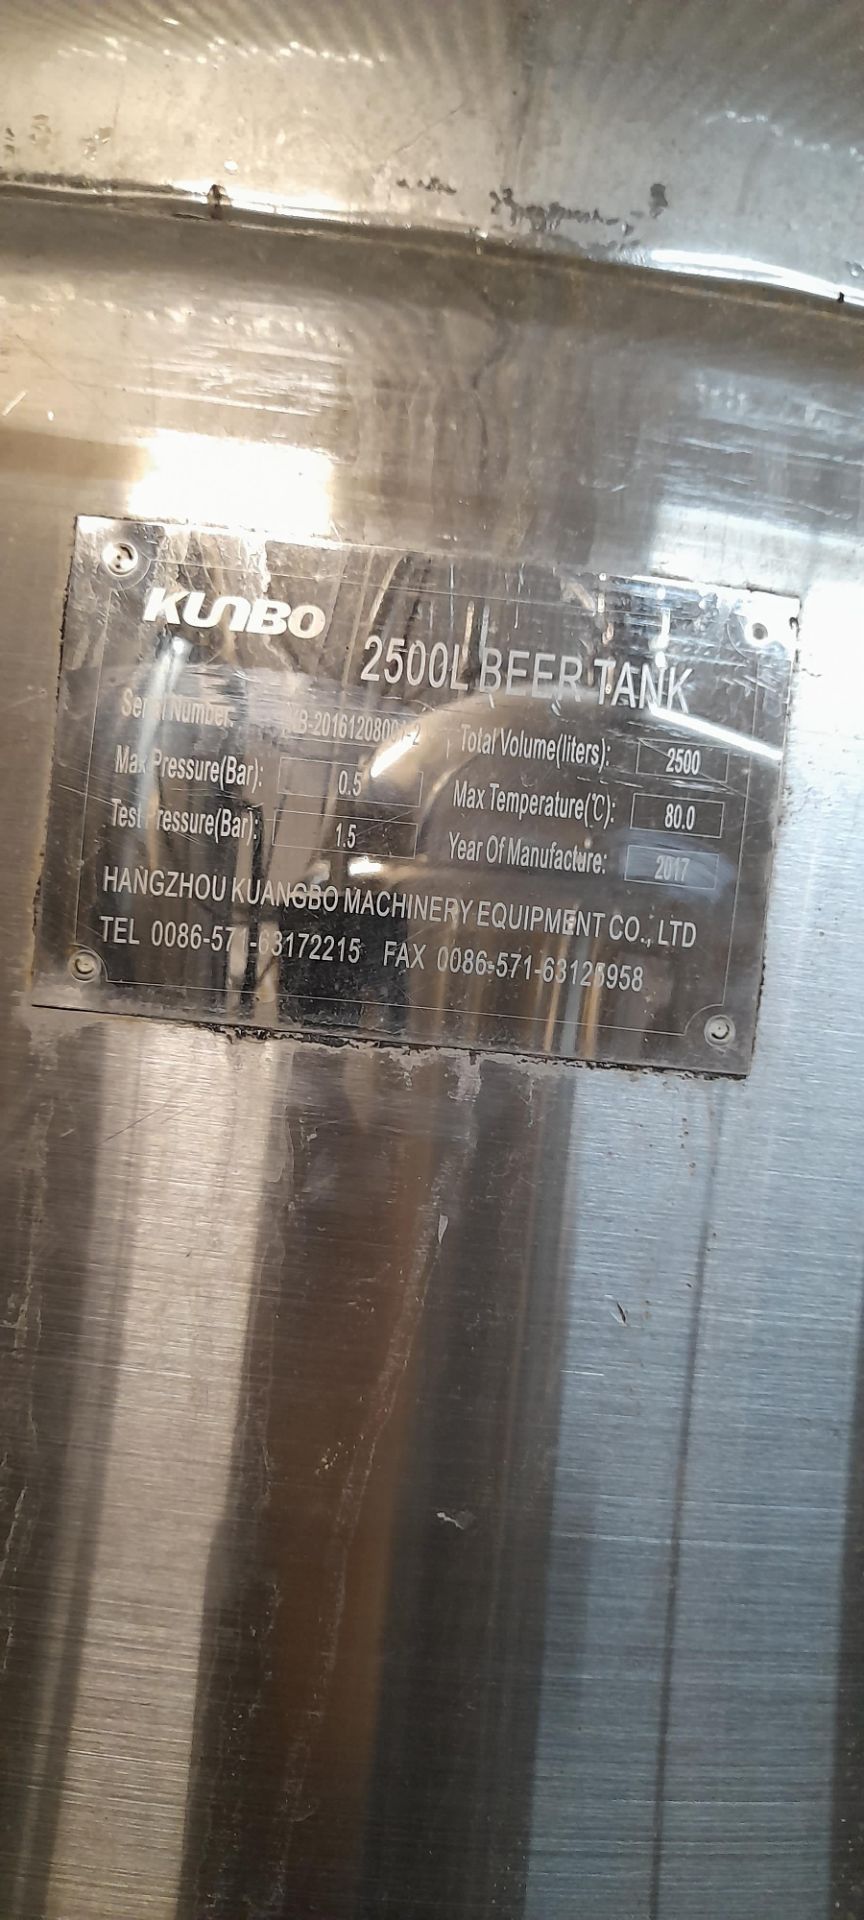 Kunbo 2500Ltr Stainless Steel Fermentation Tank, serial number KB-2016 1208001-2 (2017) (Imported by - Image 5 of 5